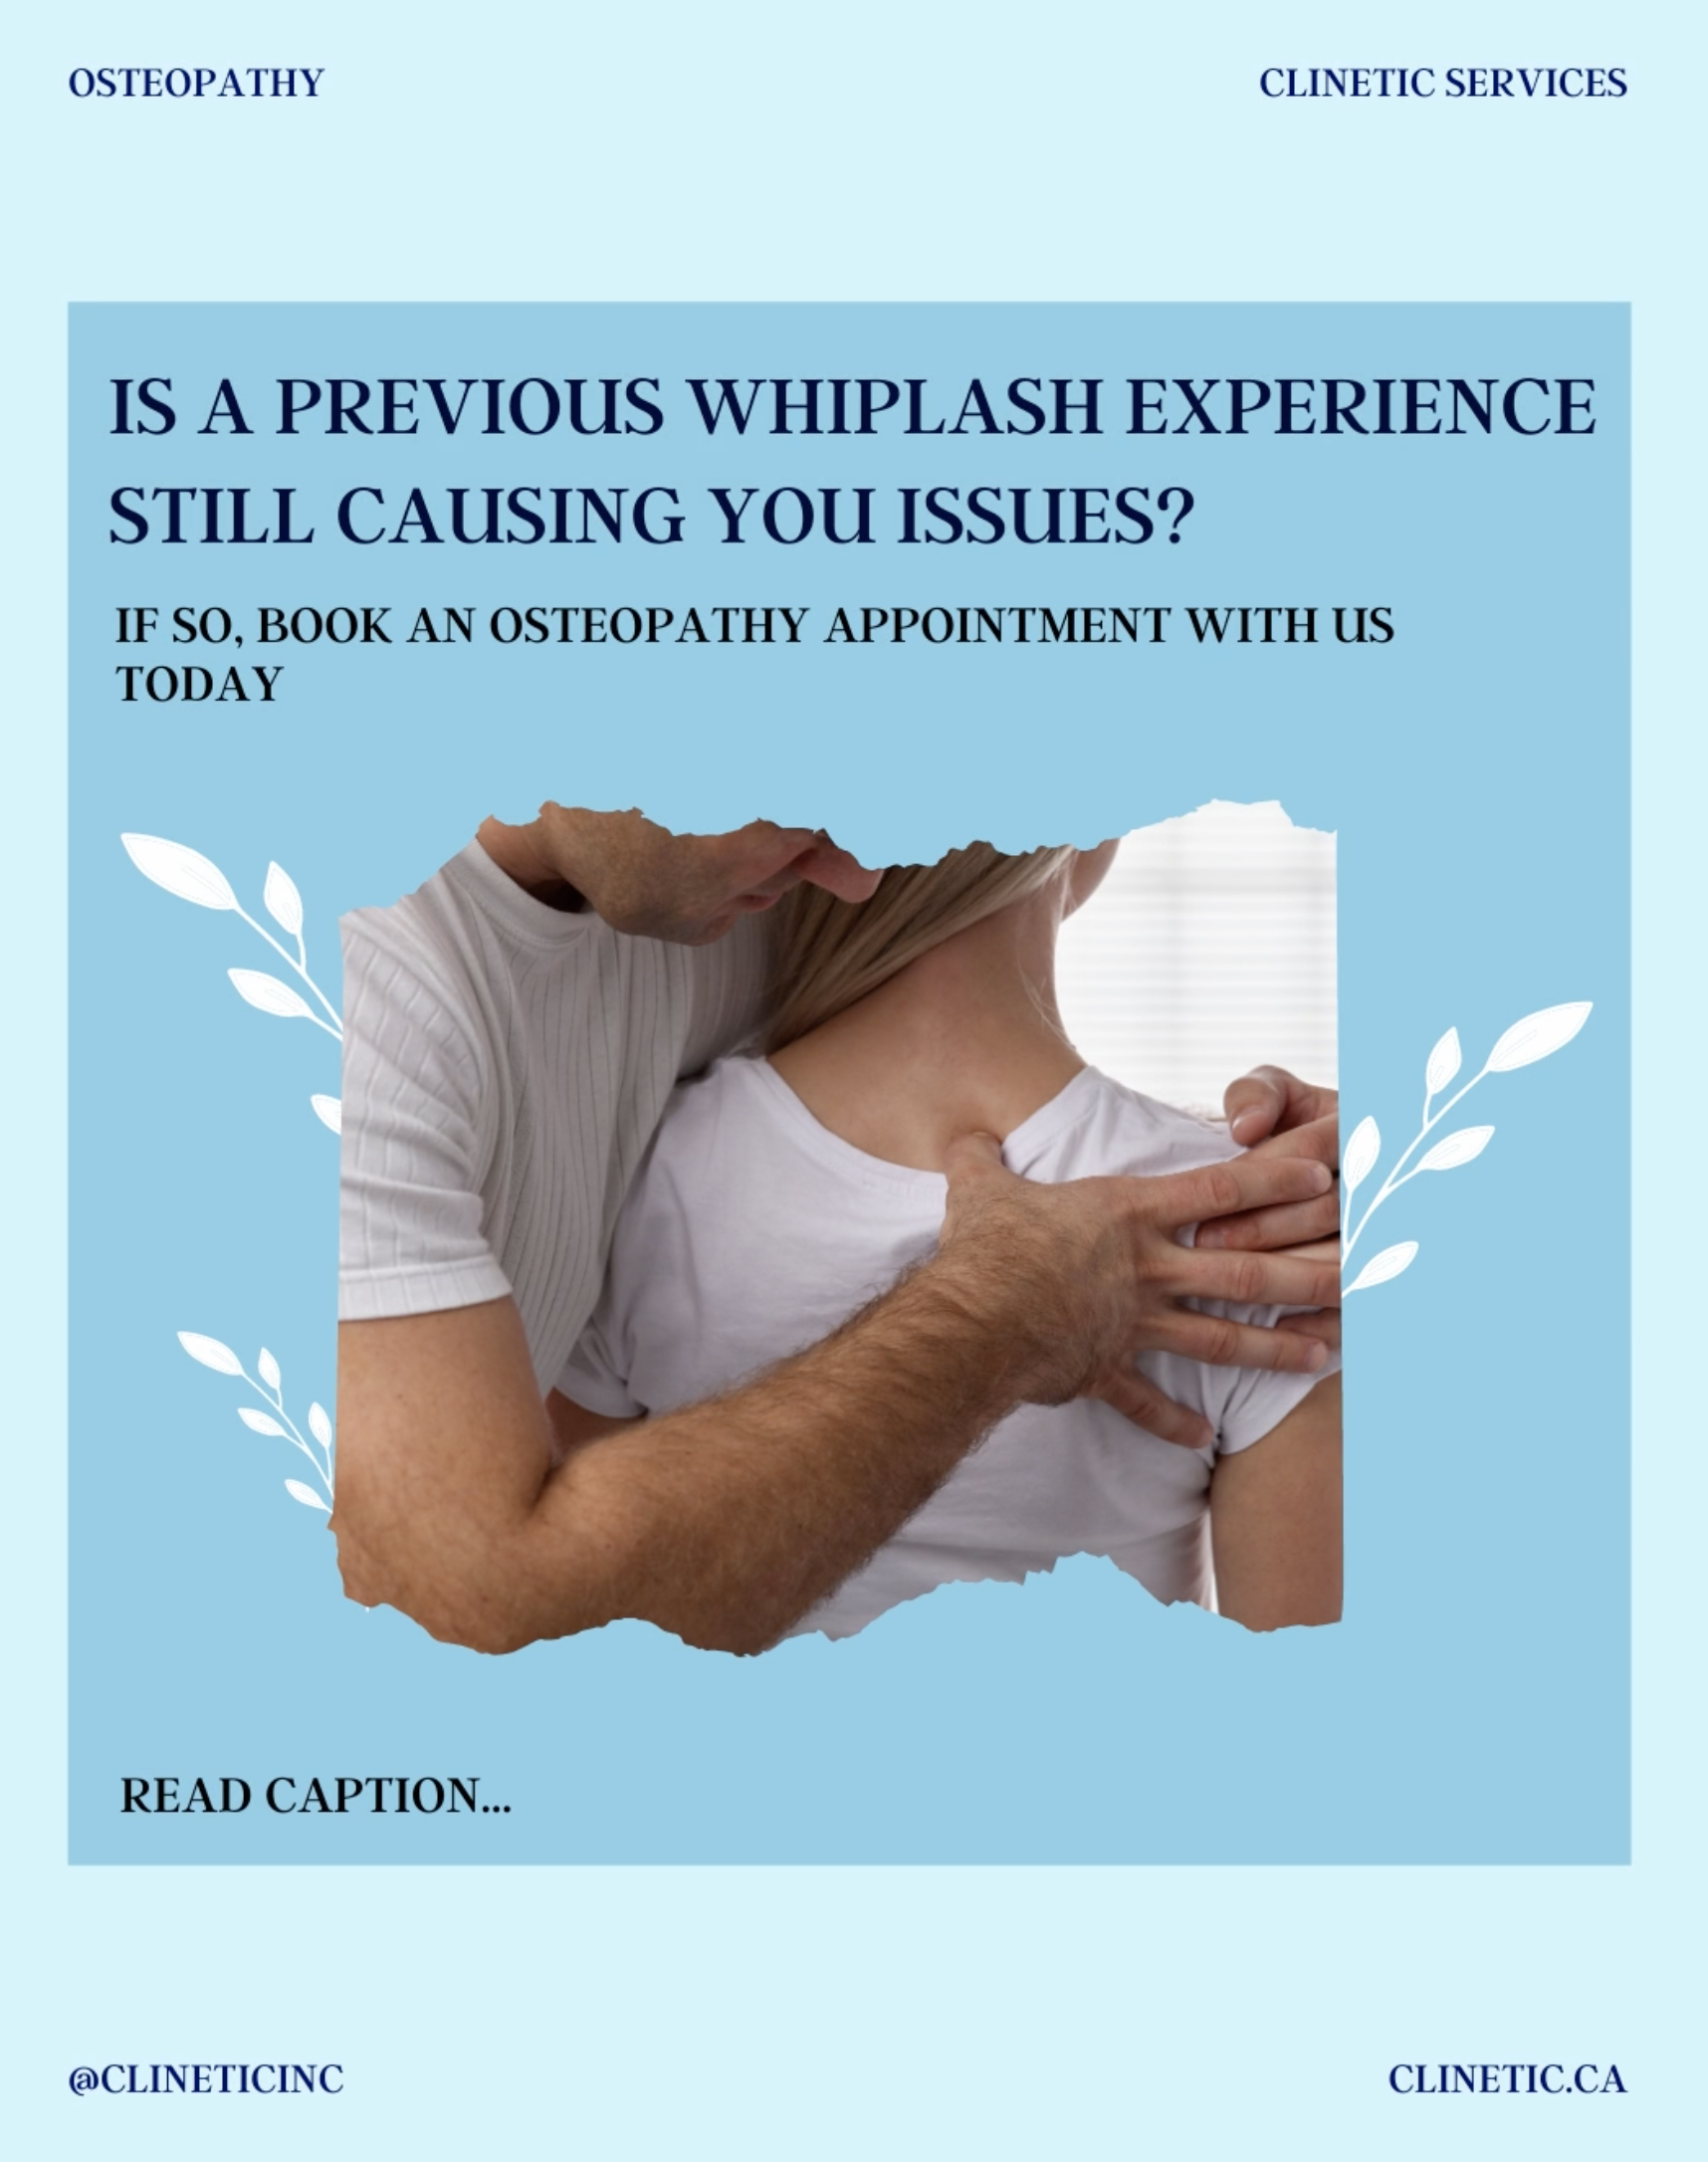 Is a previous whiplash experience still causing you issues?